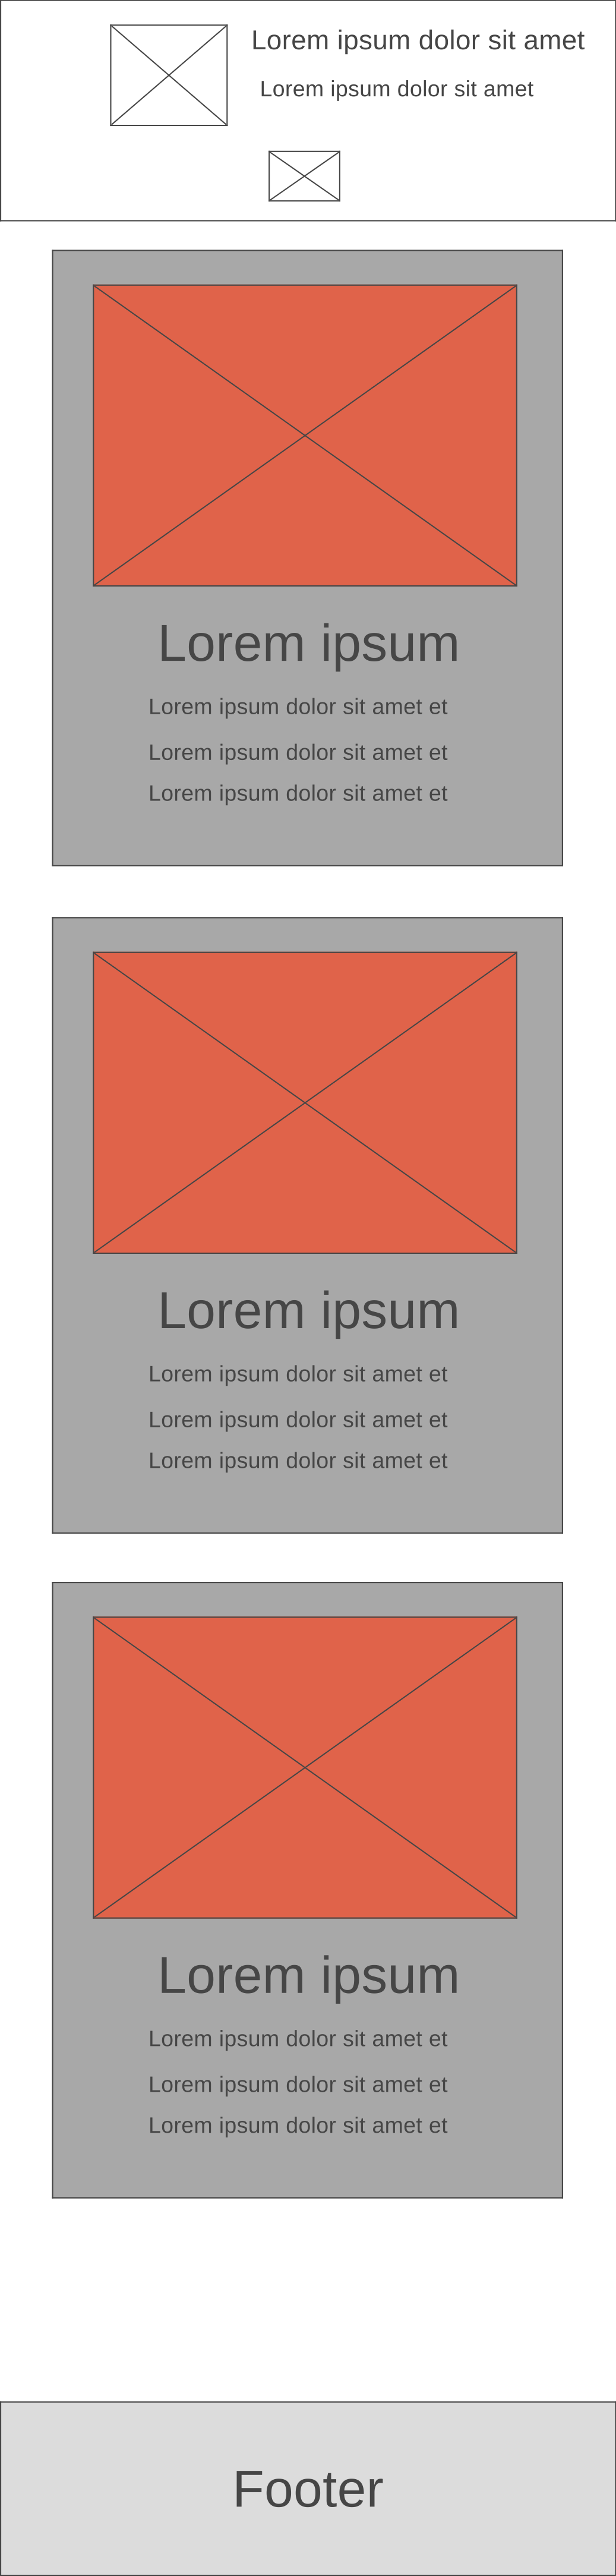 Small view wireframe